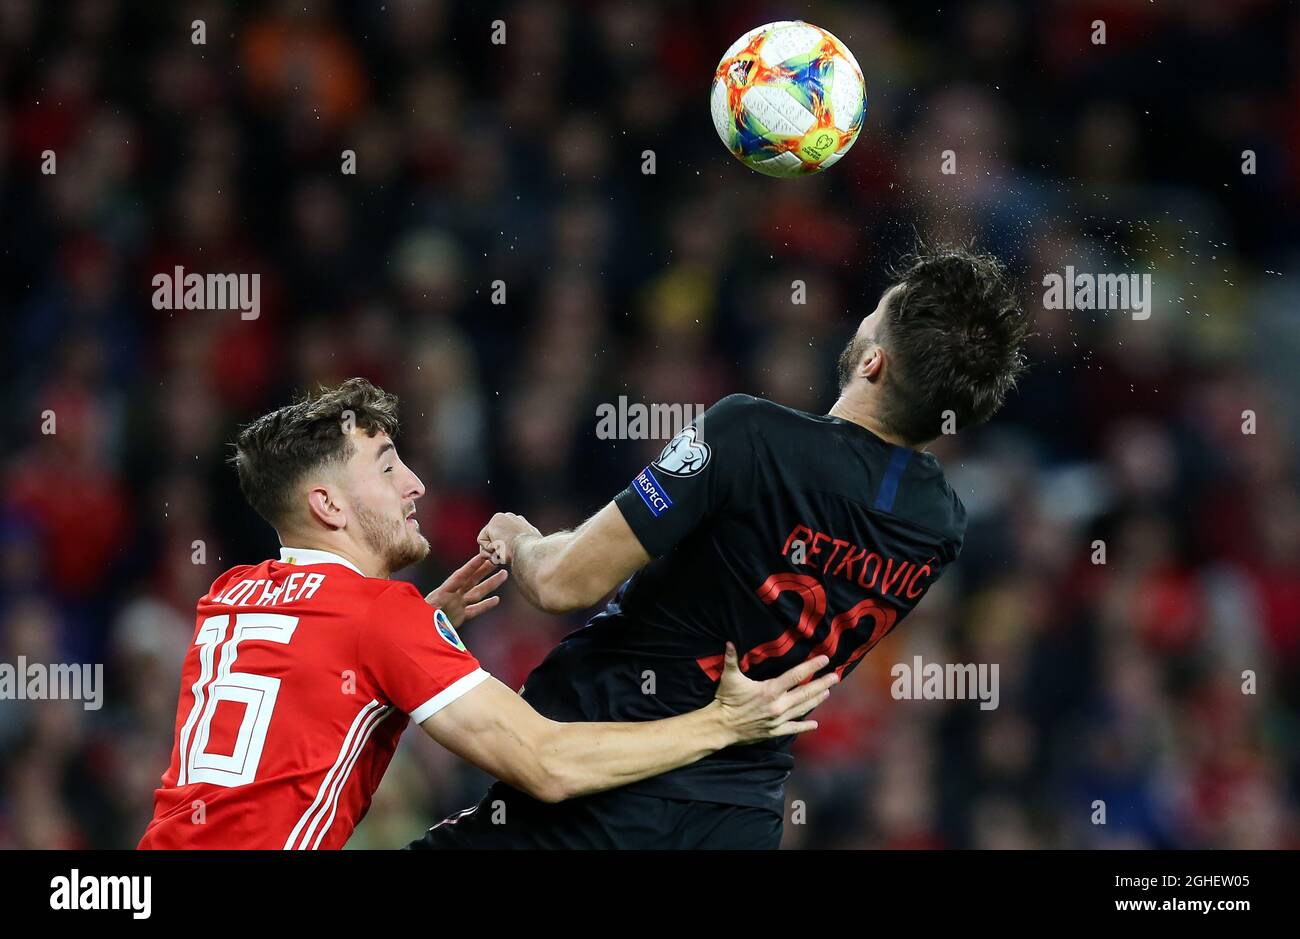 Tom Lockyer (L) of Wales and Bruno Petkovic of Croatia battle for the ball in the air during the UEFA Euro 2020 Qualifying match at the Cardiff City Stadium, Cardiff. Picture date: 13th October 2019. Picture credit should read: James Wilson/Sportimage via PA Images Stock Photo